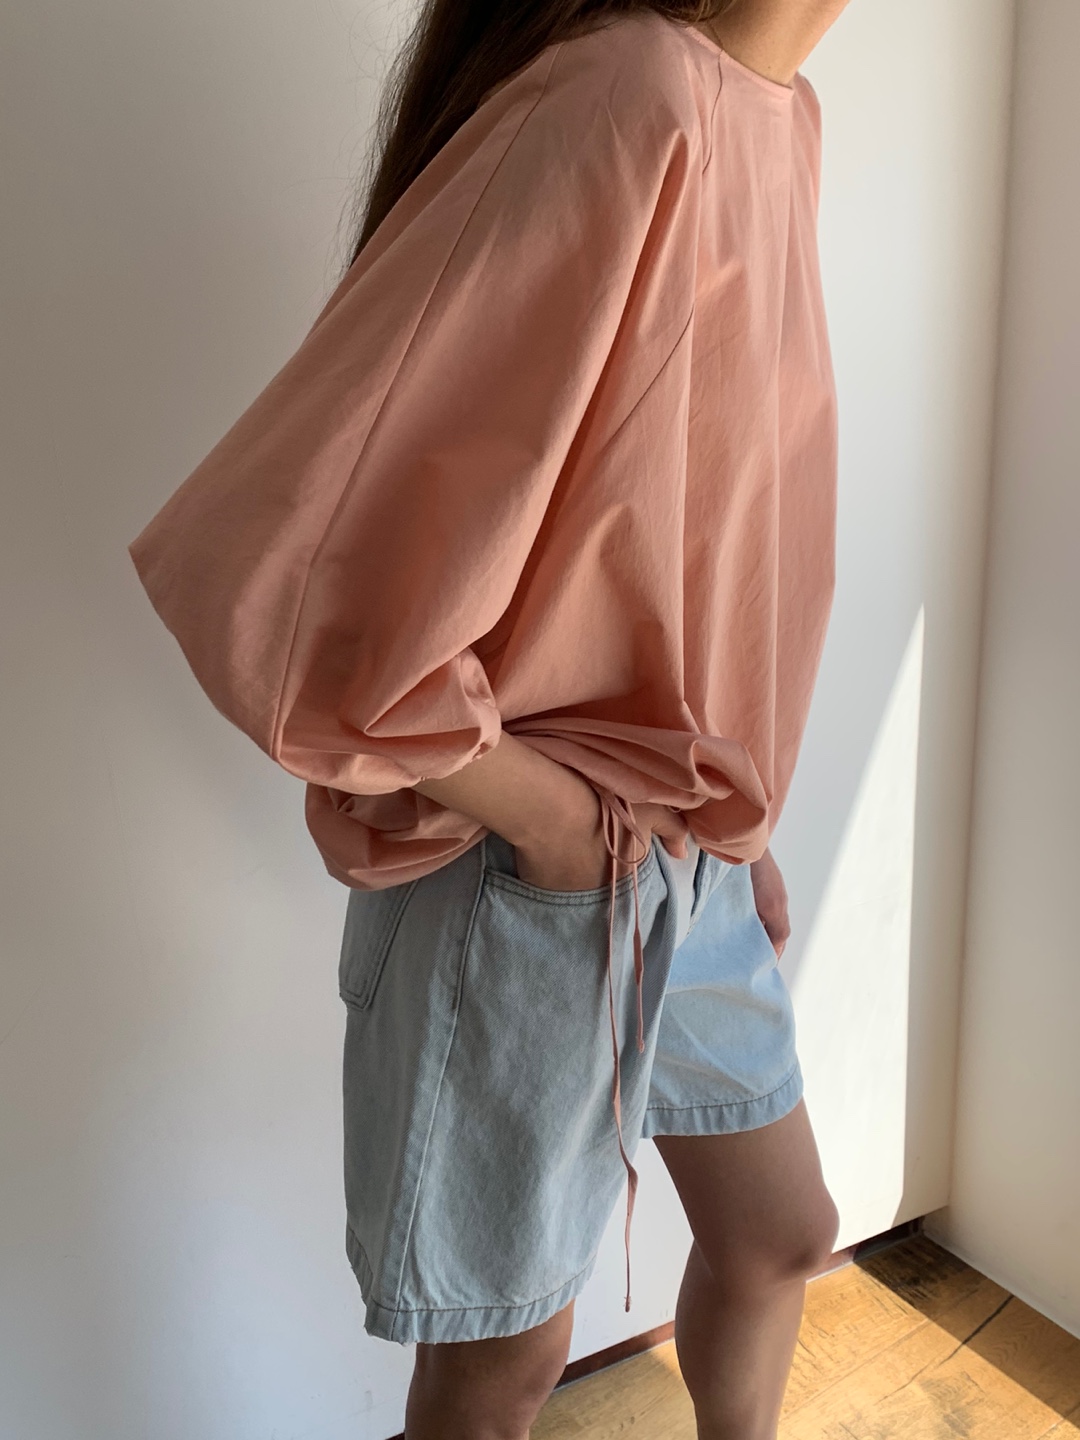 over string blouse